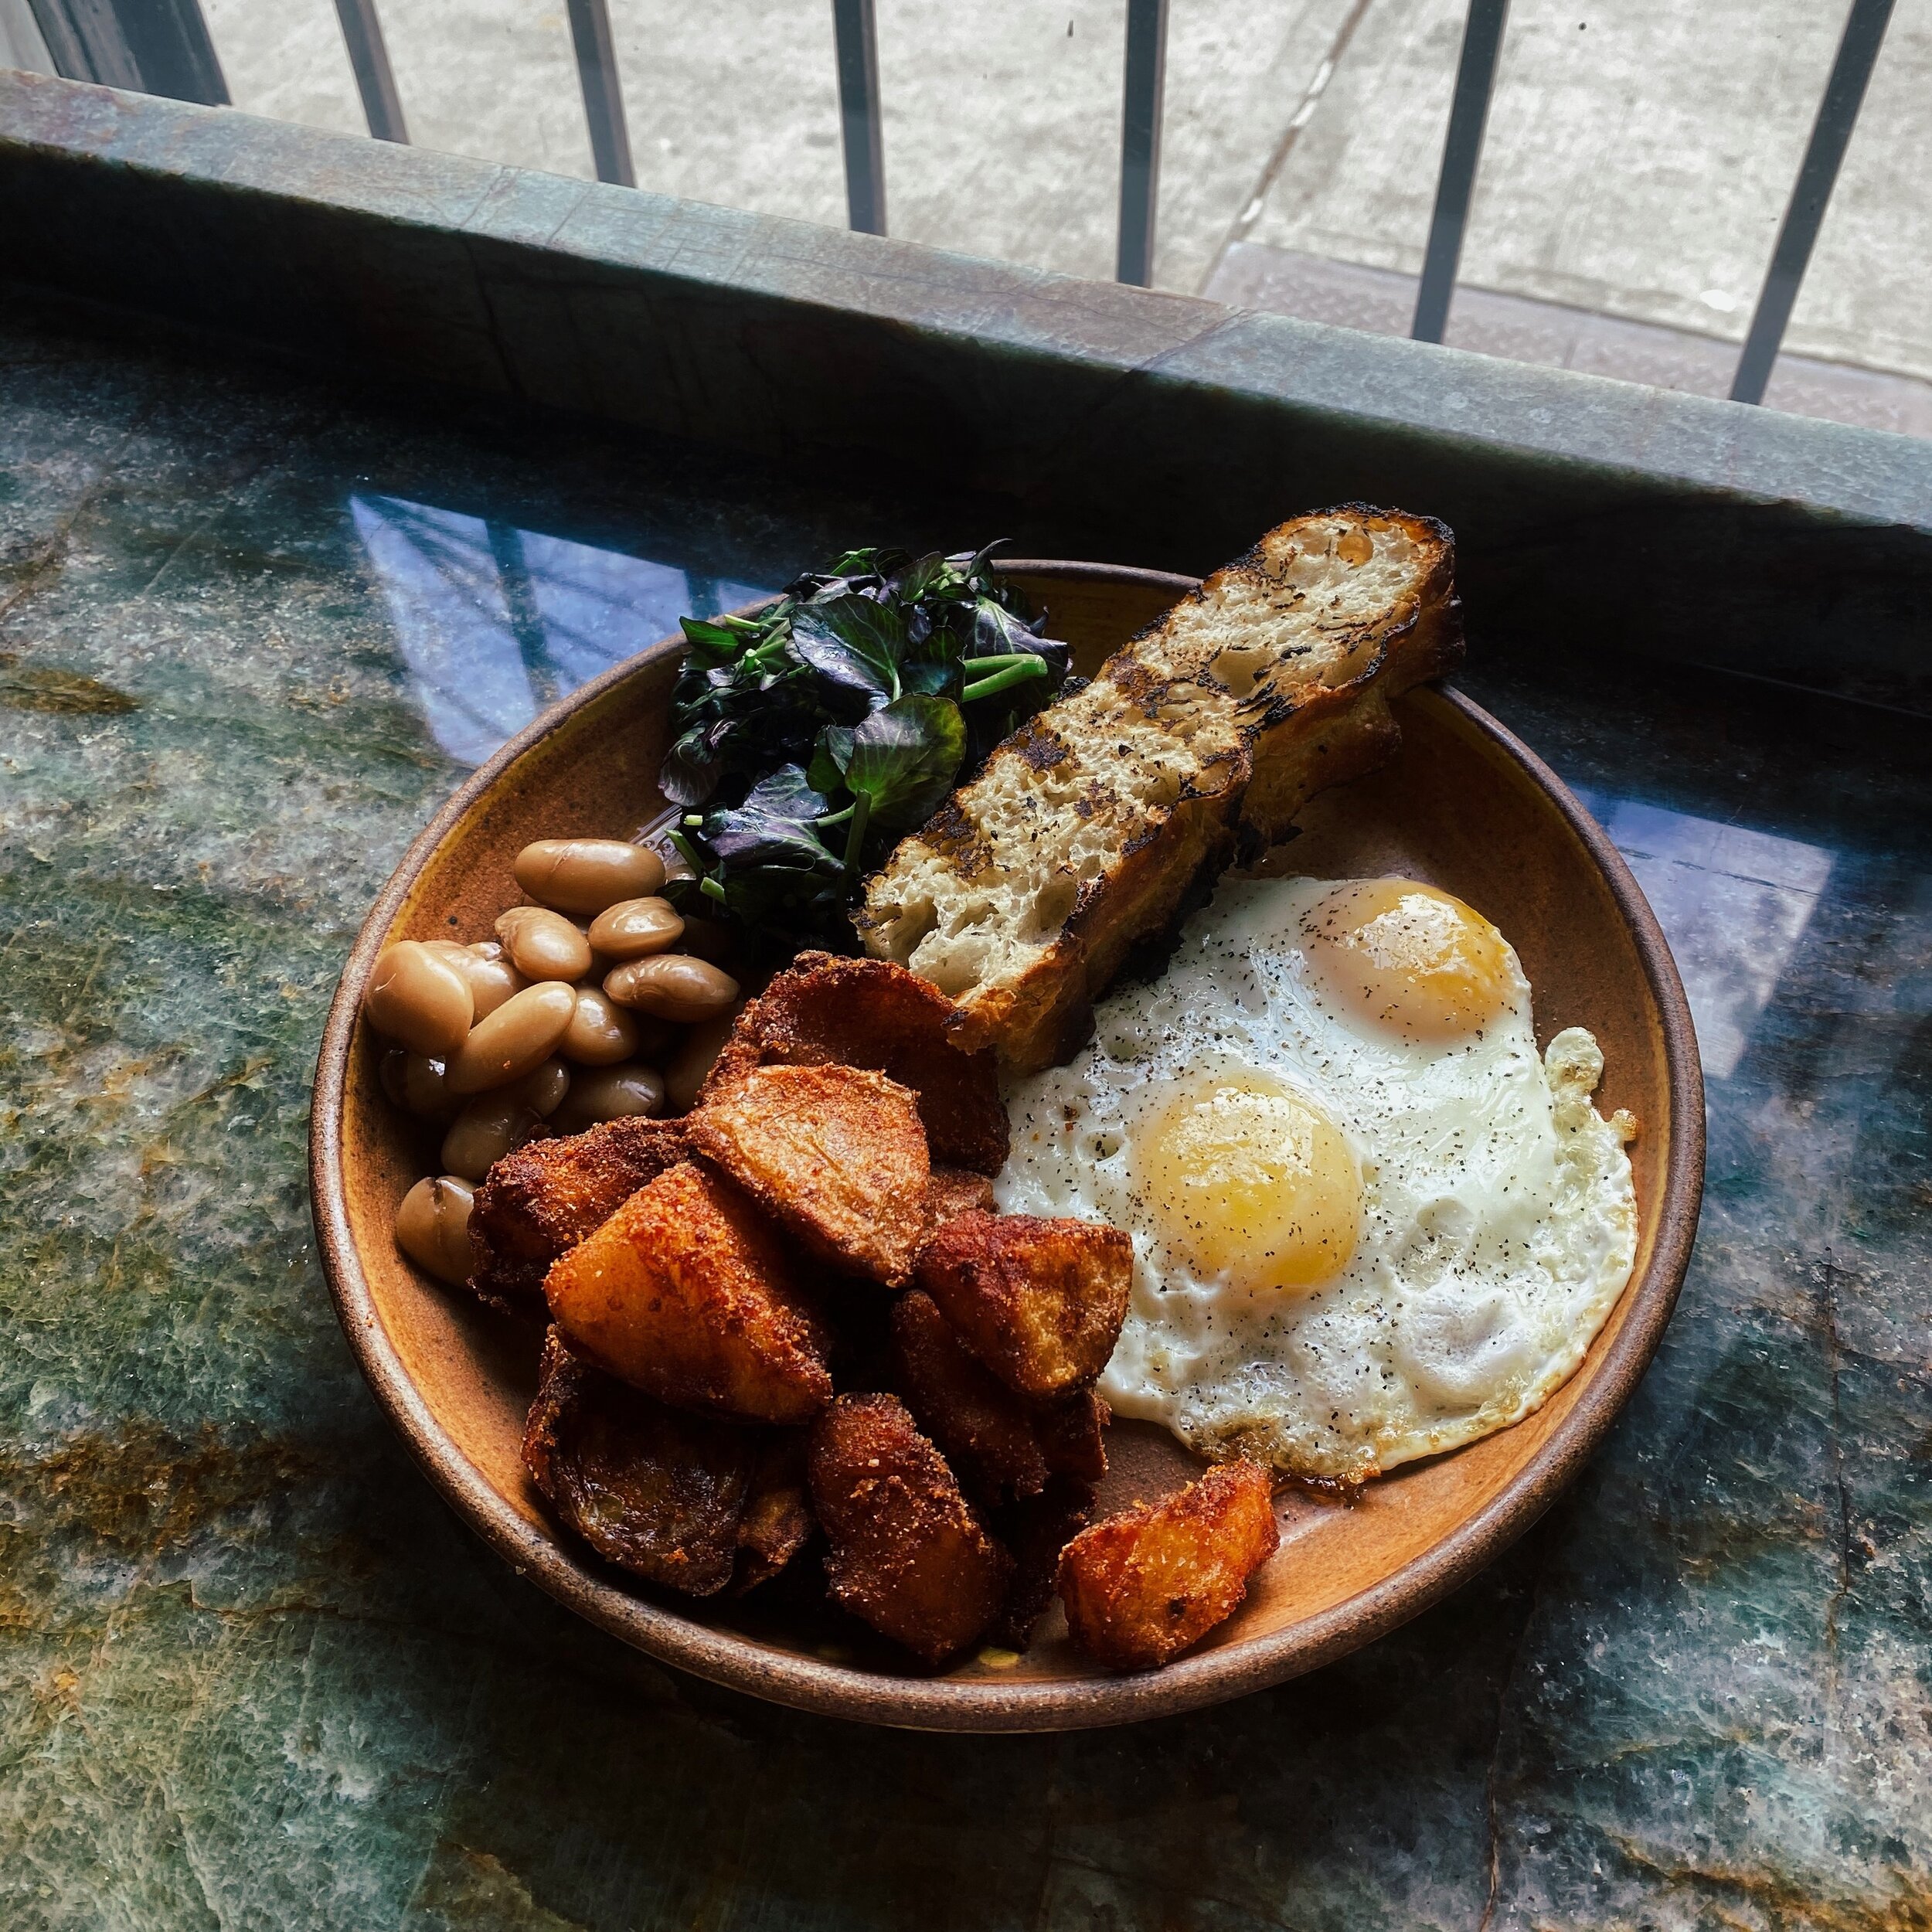 Back at it again for brunch today, 11-4pm!

Our breakfast plate comes with two eggs any style, our house made focaccia, brothy beans, watercrest, and our crispy spiced potatoes.